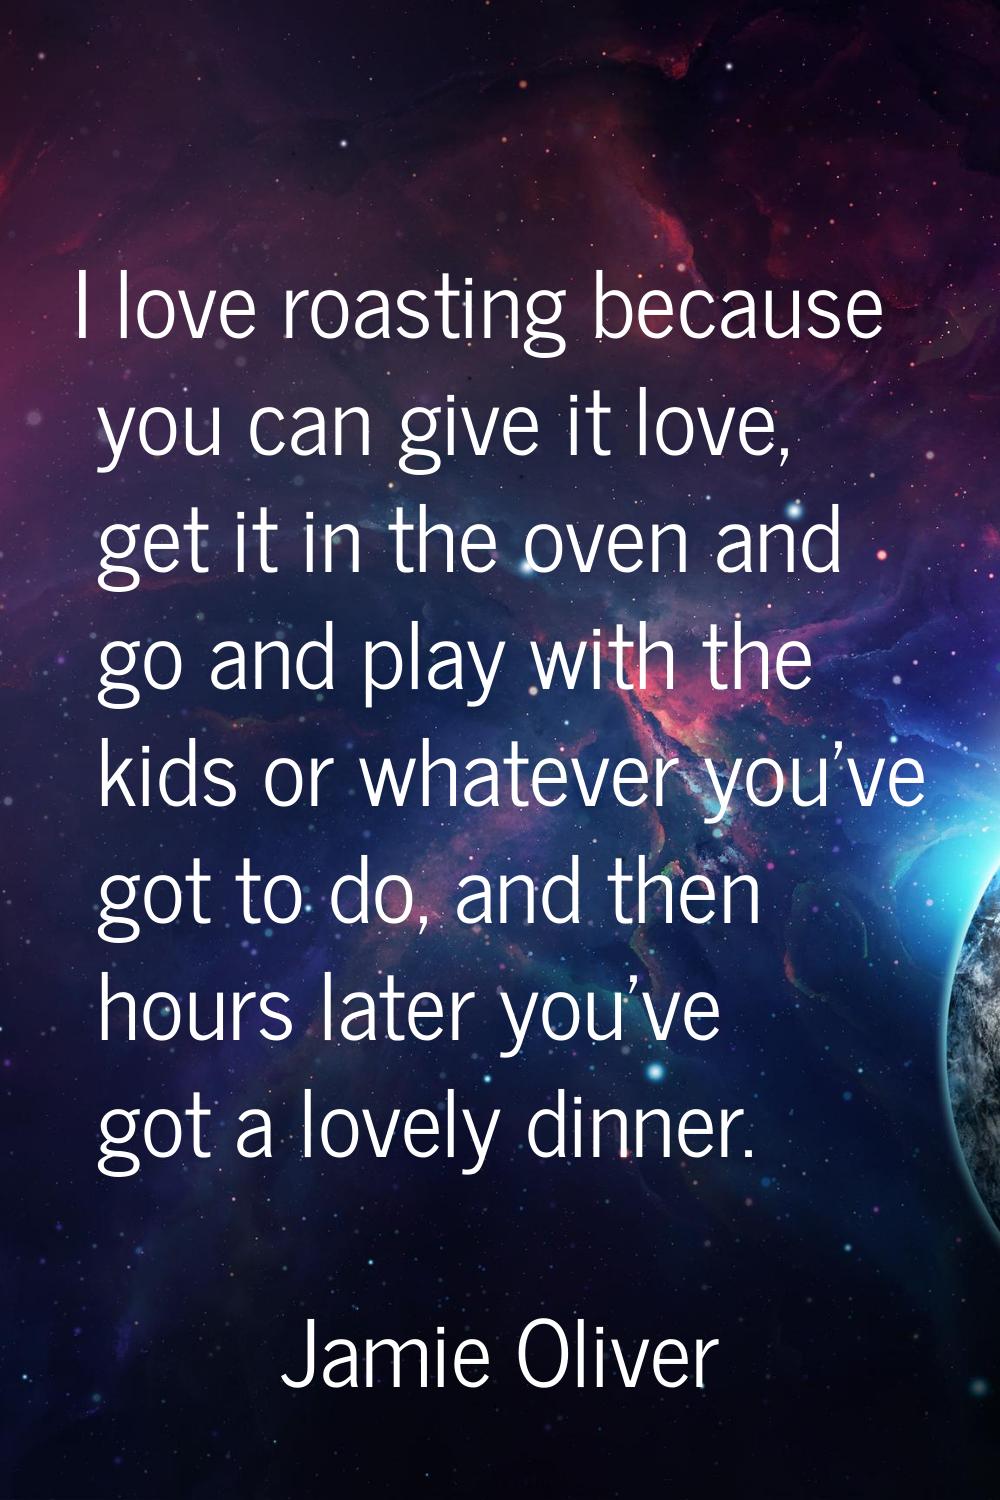 I love roasting because you can give it love, get it in the oven and go and play with the kids or w